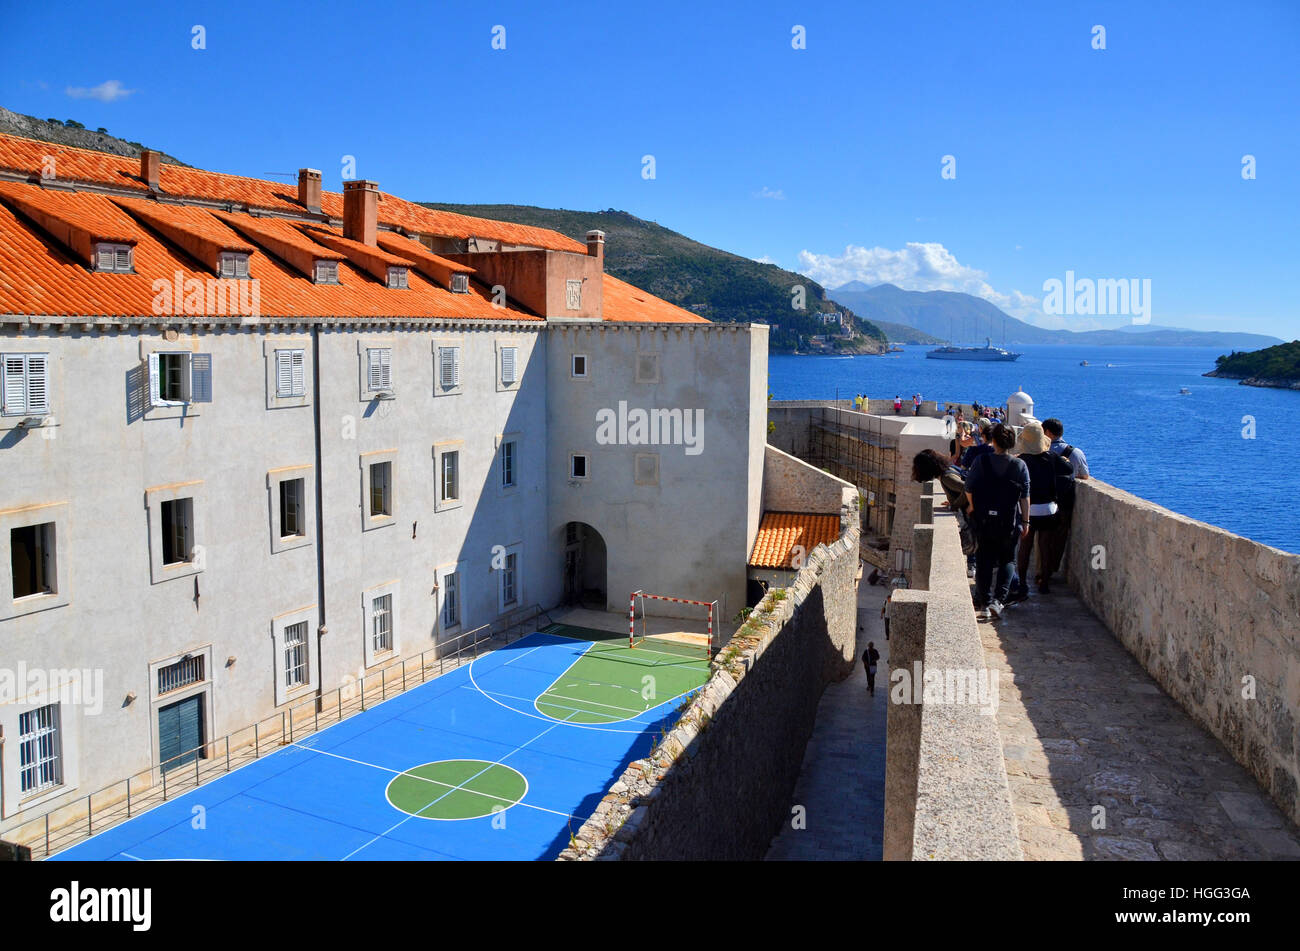 Tourists walk along the wall of the walled city of Dubrovnik, Croatia, passing a netball court belonging to a local school. Stock Photo